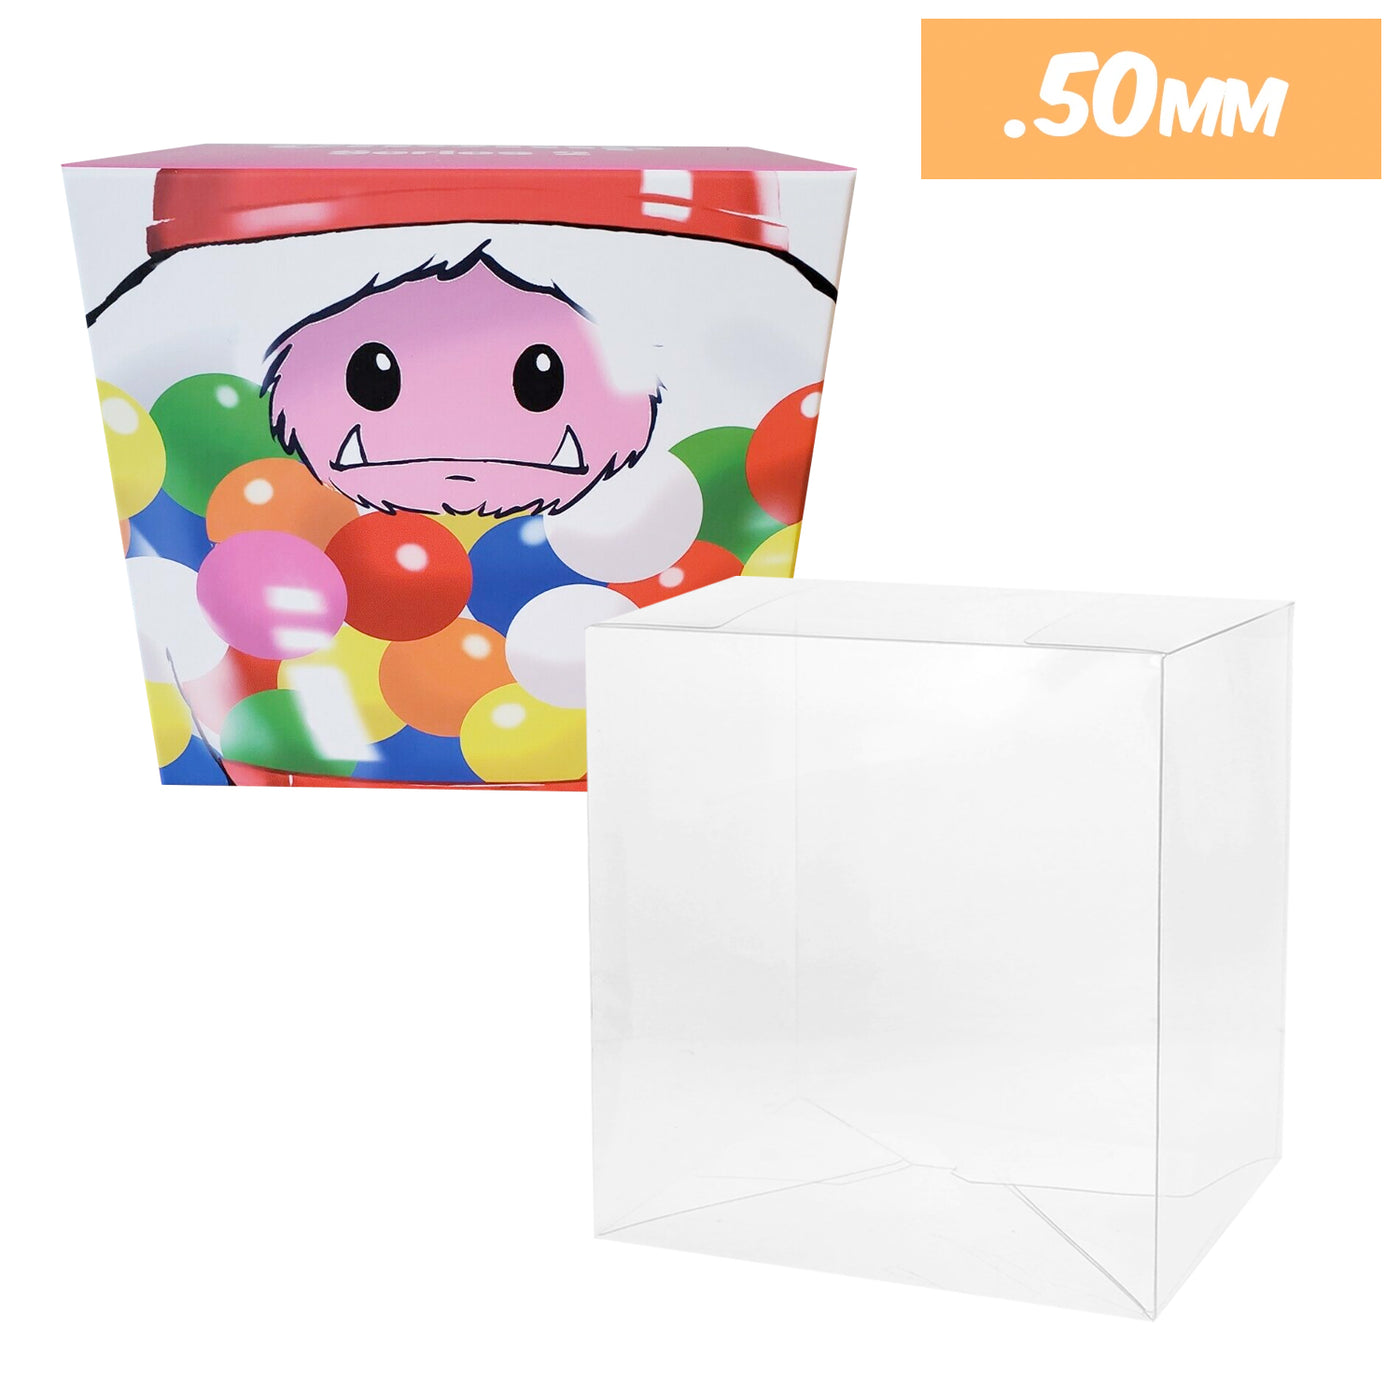 CHOMP GUMBALL Protectors for Abominable Toys Vinyl Collectible Figures (50mm thick) 7h x 7.75w x 4.25d